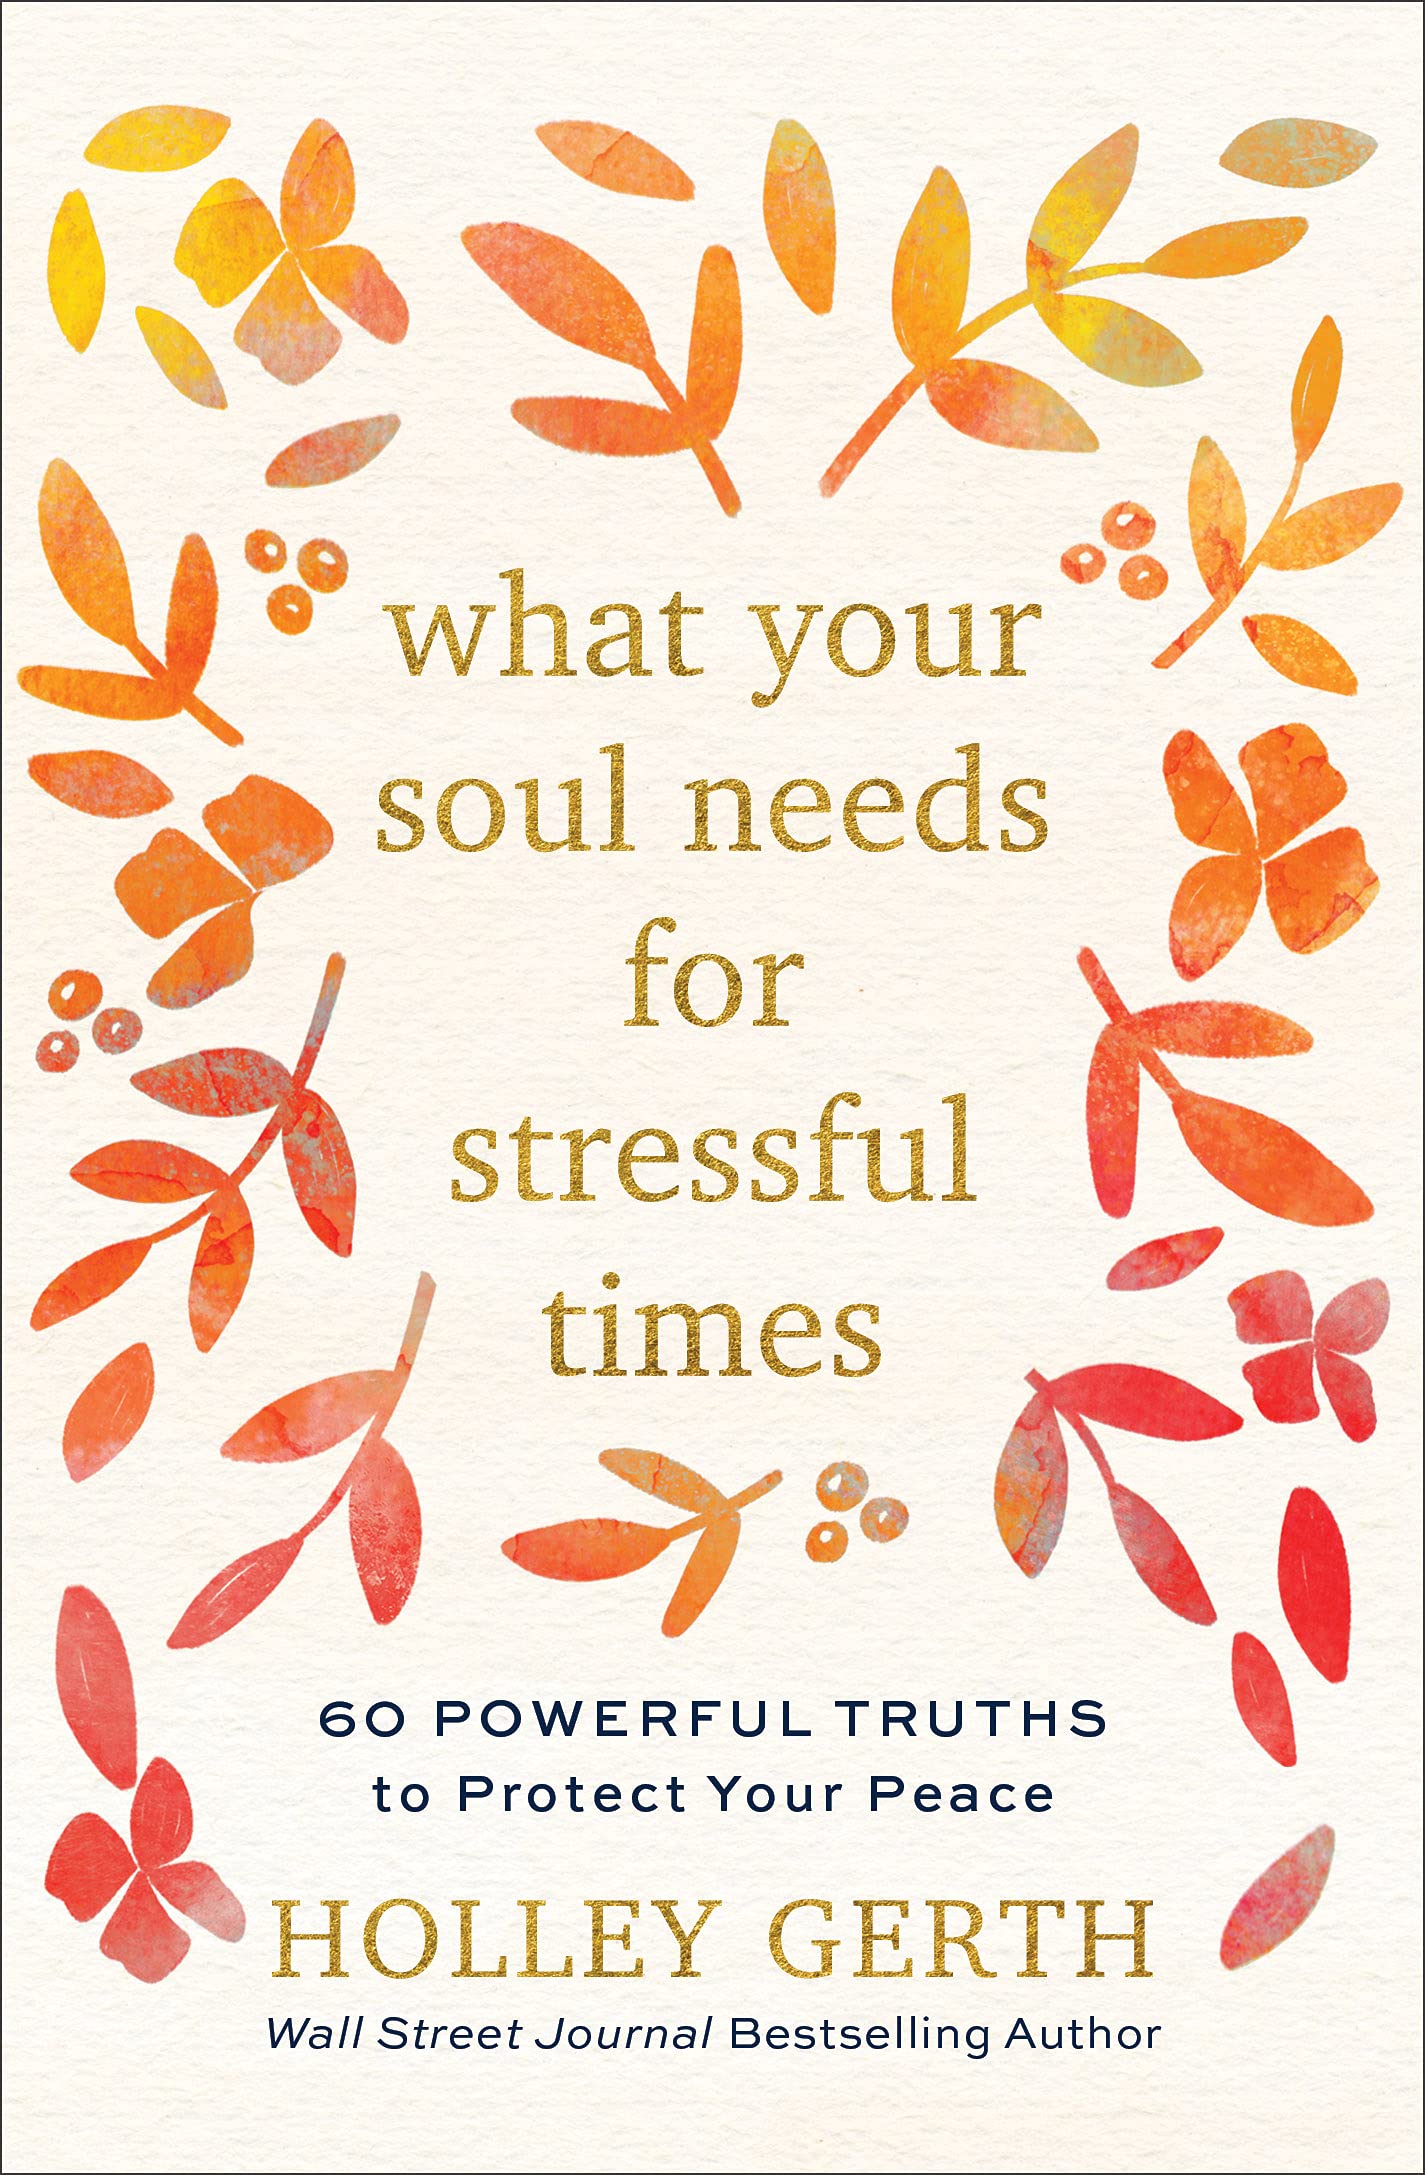 ROCKONLINE | What Your Soul Needs for Stressful Times: 60 Powerful Truths to Protect Your Peace (hardcover) | Holley Gerth | Christian Women | Journal | New Creation Church | NCC | Joseph Prince | ROCK Bookshop | ROCK Bookstore | Star Vista | Scriptures | Devotional | Free delivery for Singapore Orders above $50.